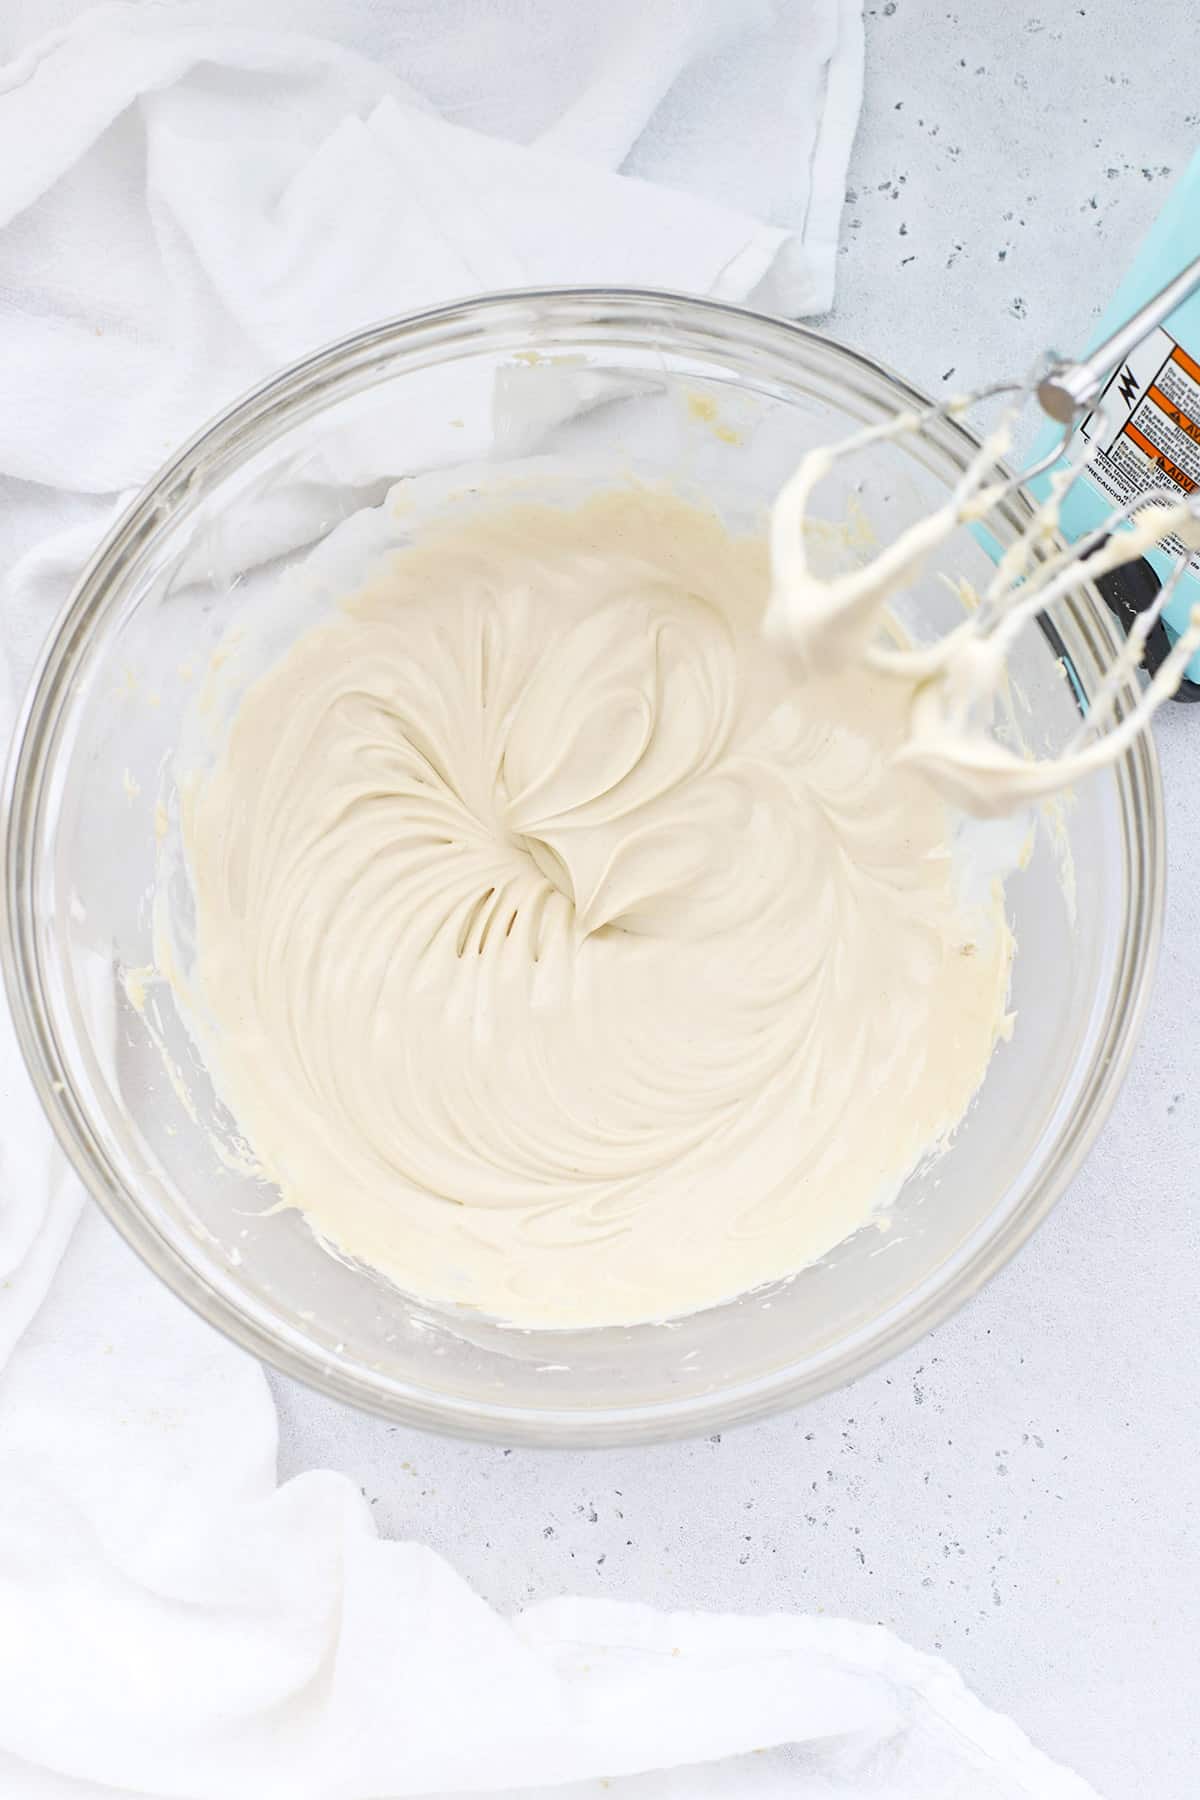 Whipping cream cheese frosting